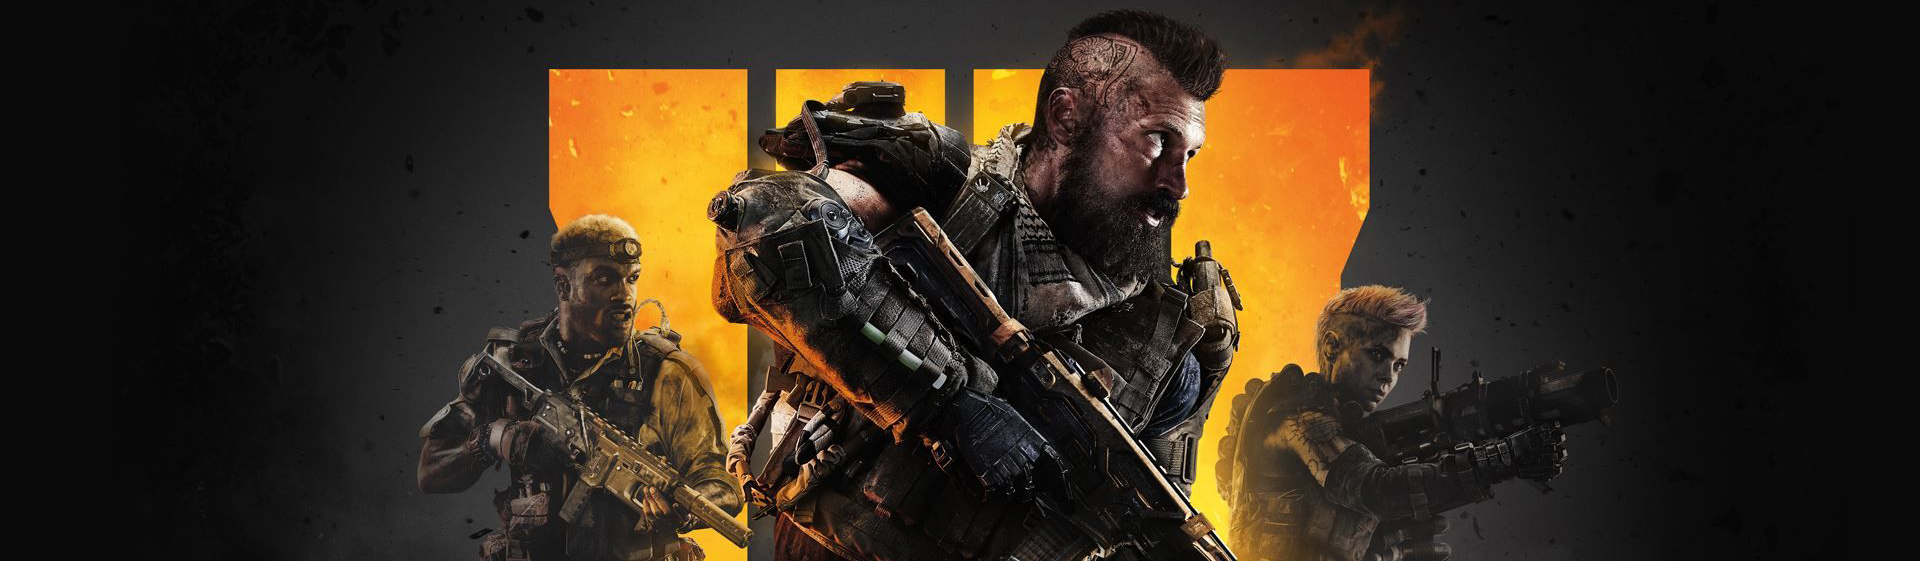 CALL OF DUTY: BLACK OPS 4 BREAKING THE SALES RECORD WITH VIRTUOS CONTRIBUTION IN ART